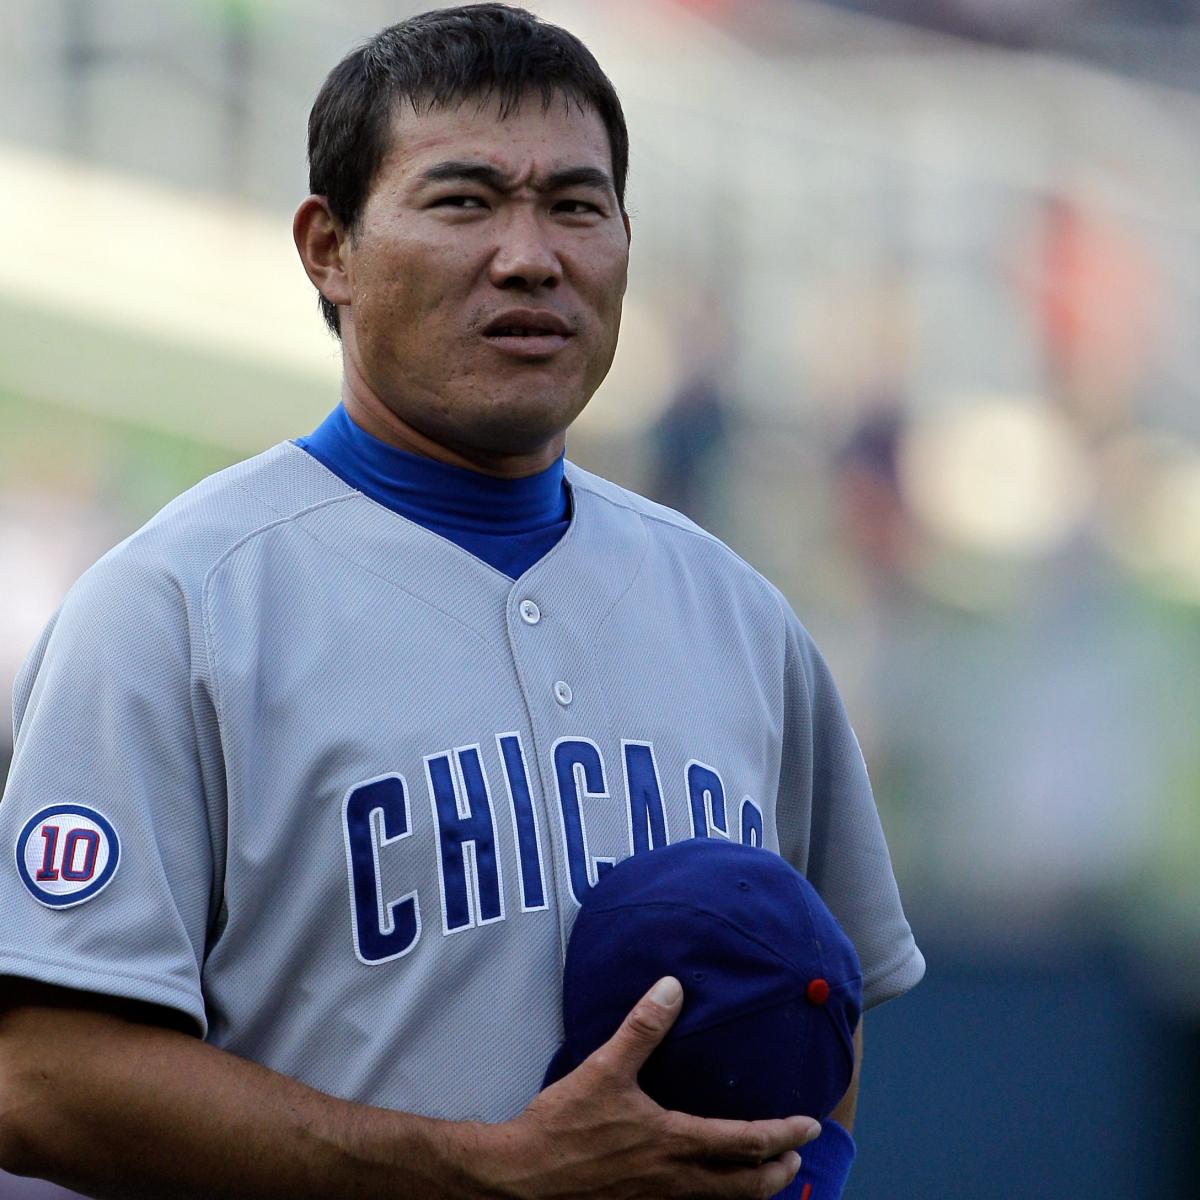 Chicago White Sox: Is Fukudome a Reliable 4th Outfielder or